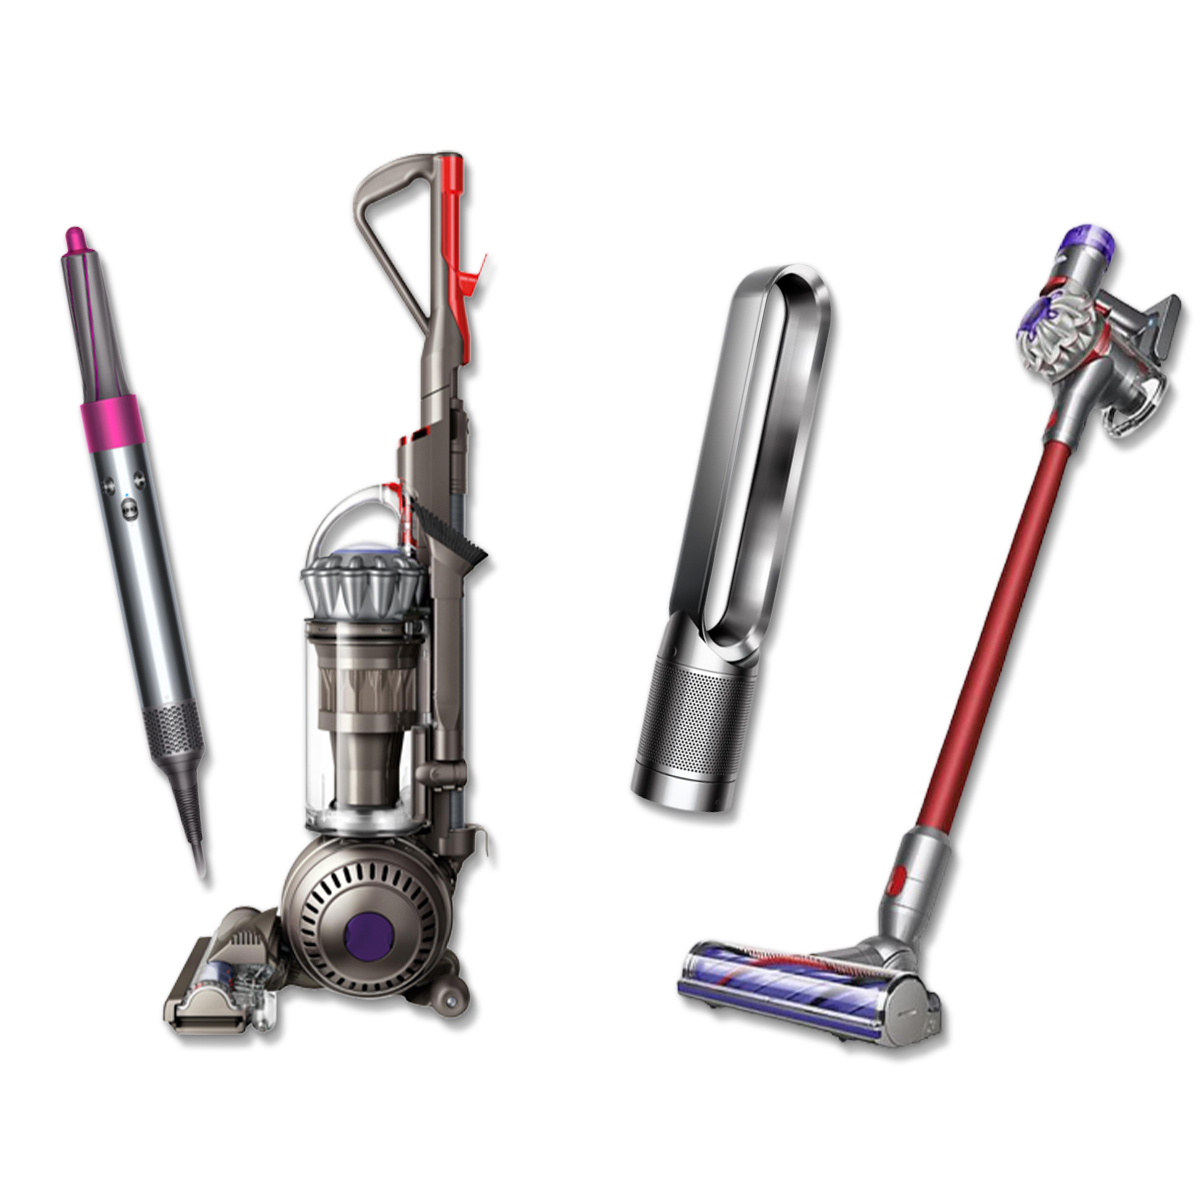 Dyson Black Friday Deals: Save on AirWrap, Dryers, Vacuums More - E!